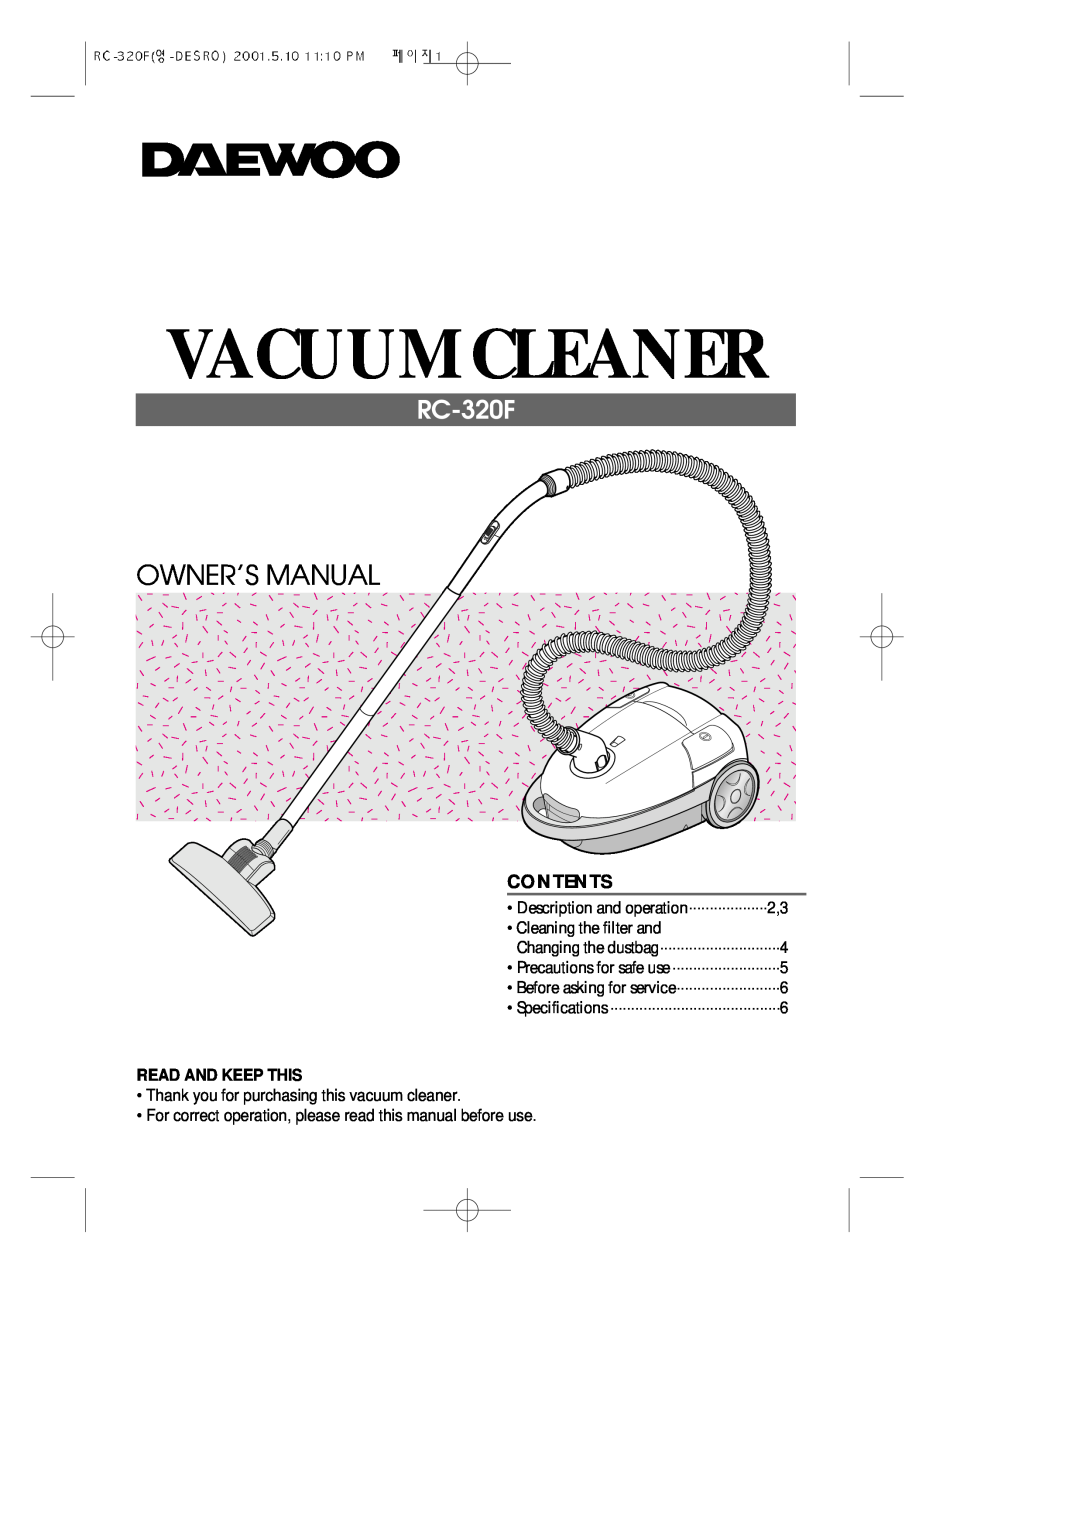 Daewoo RC-320F owner manual Read And Keep This, Vacuum Cleaner, Owner’S Manual, Contents, Precautions for safe use 